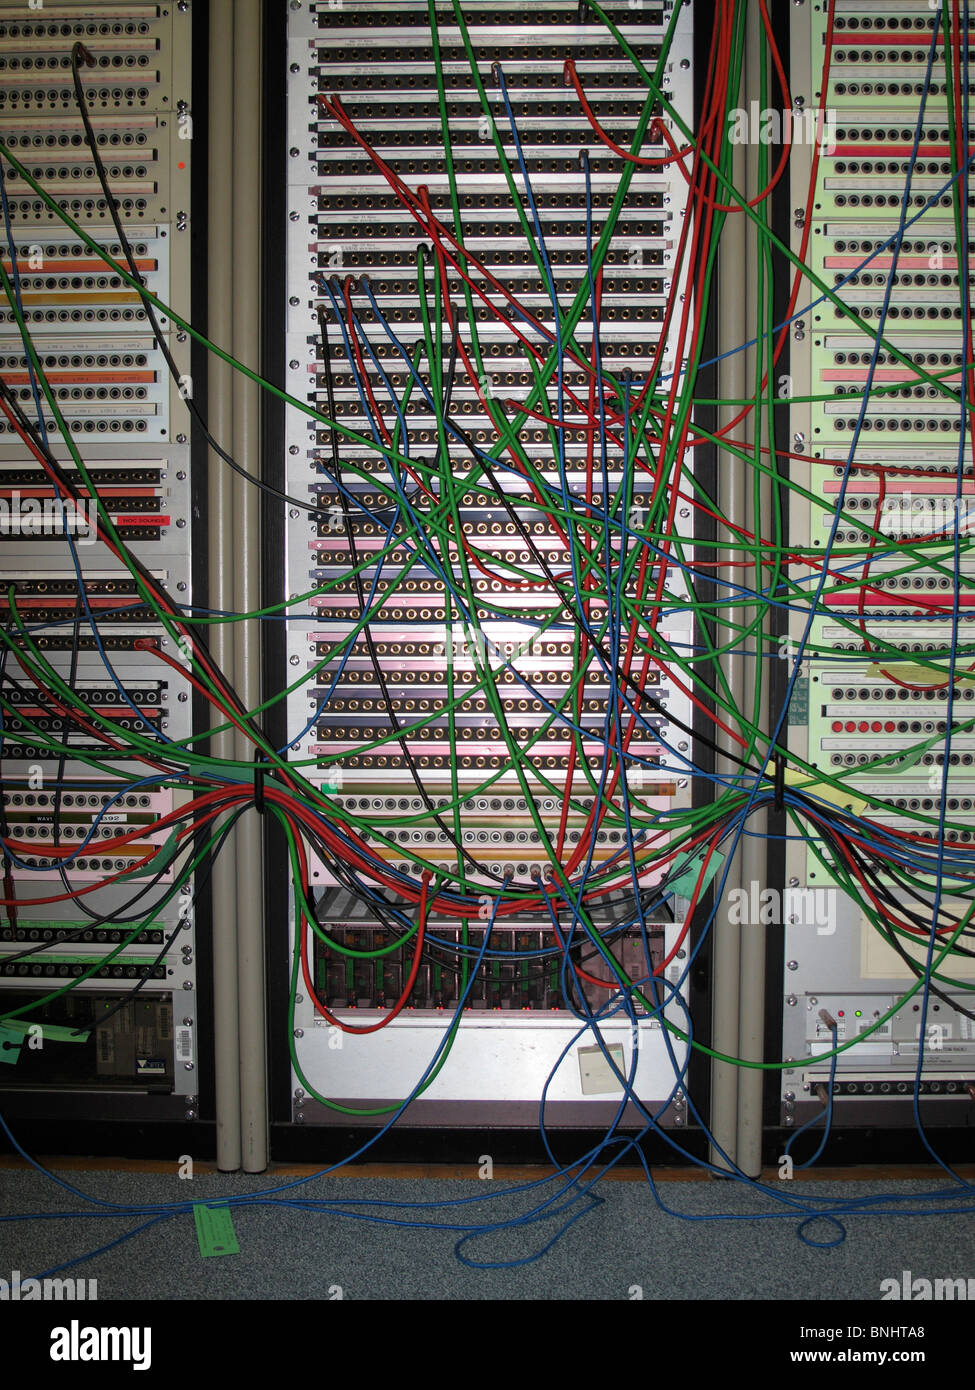 Coloured wires extending from tall computer servers Stock Photo